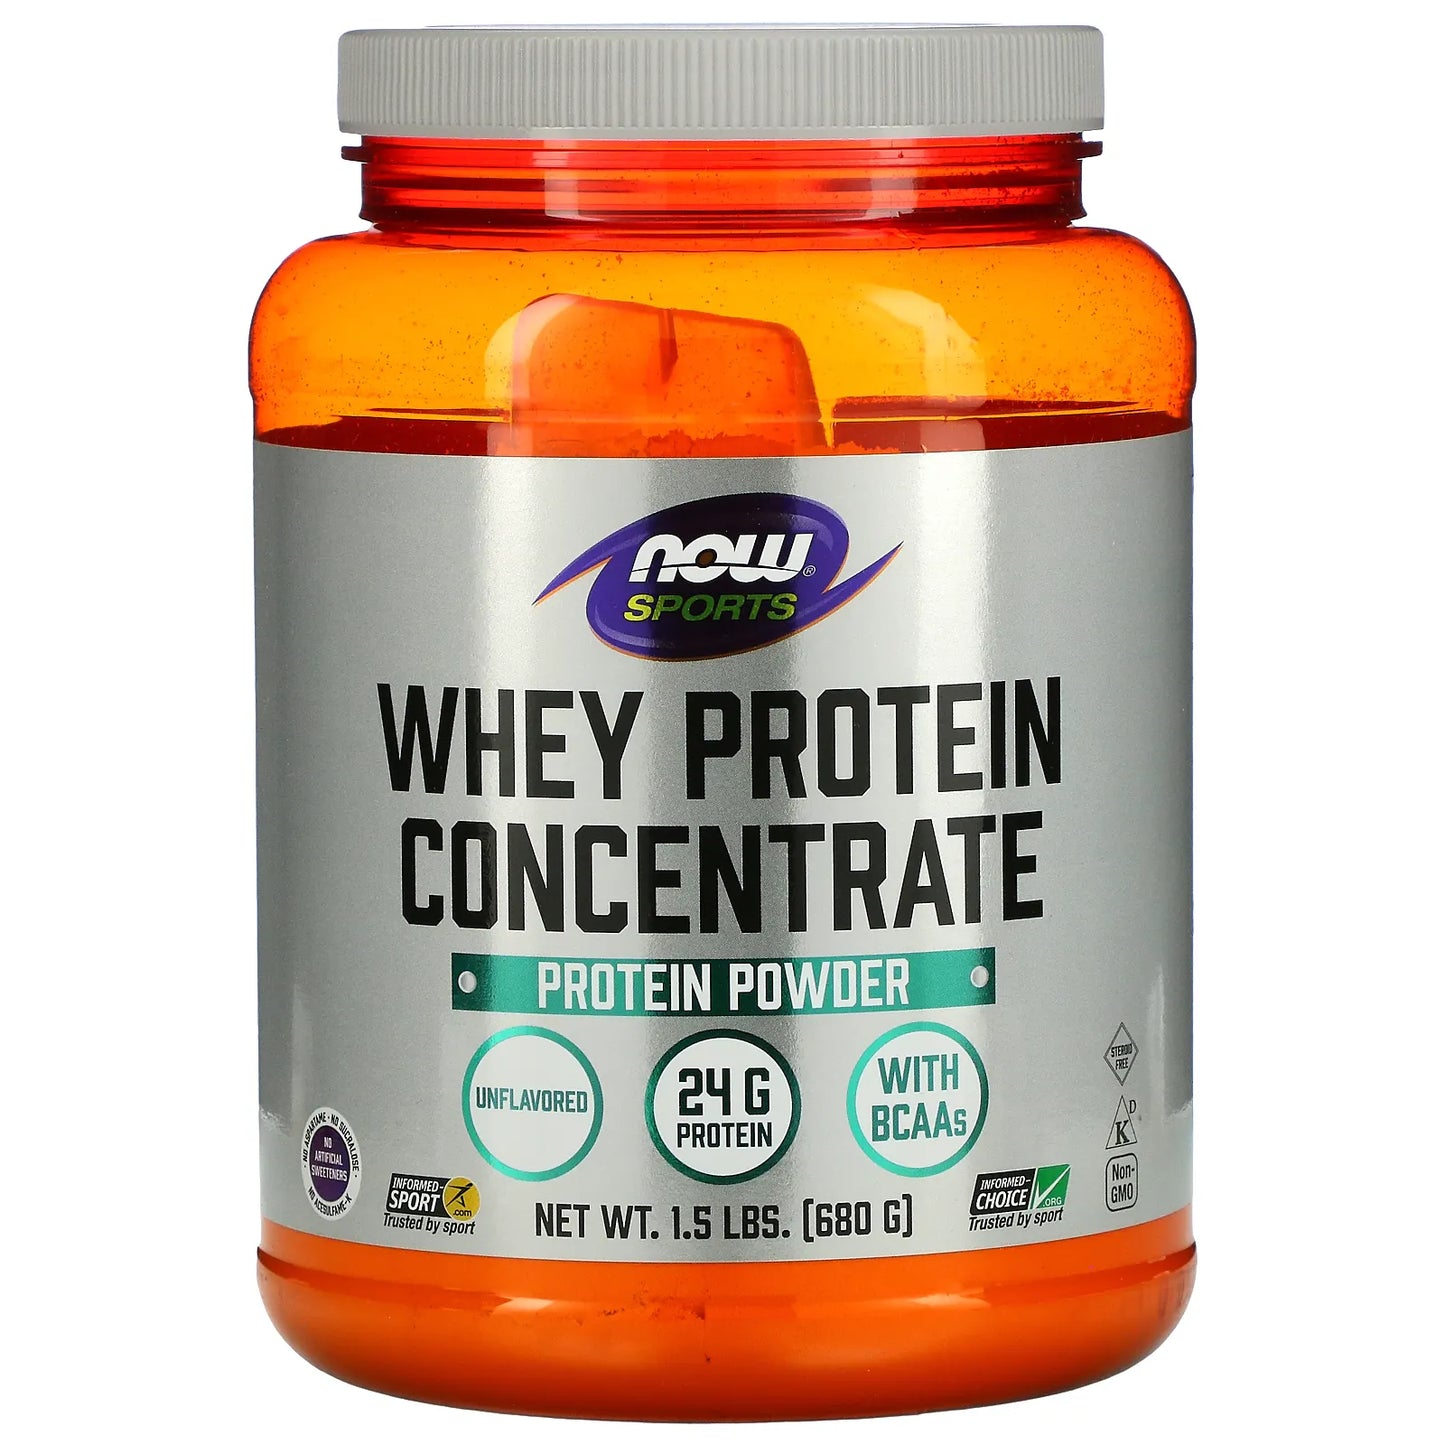 NOW SPORTS WHEY PROTEIN CONCENTRATE PROTEIN POWDER 680G